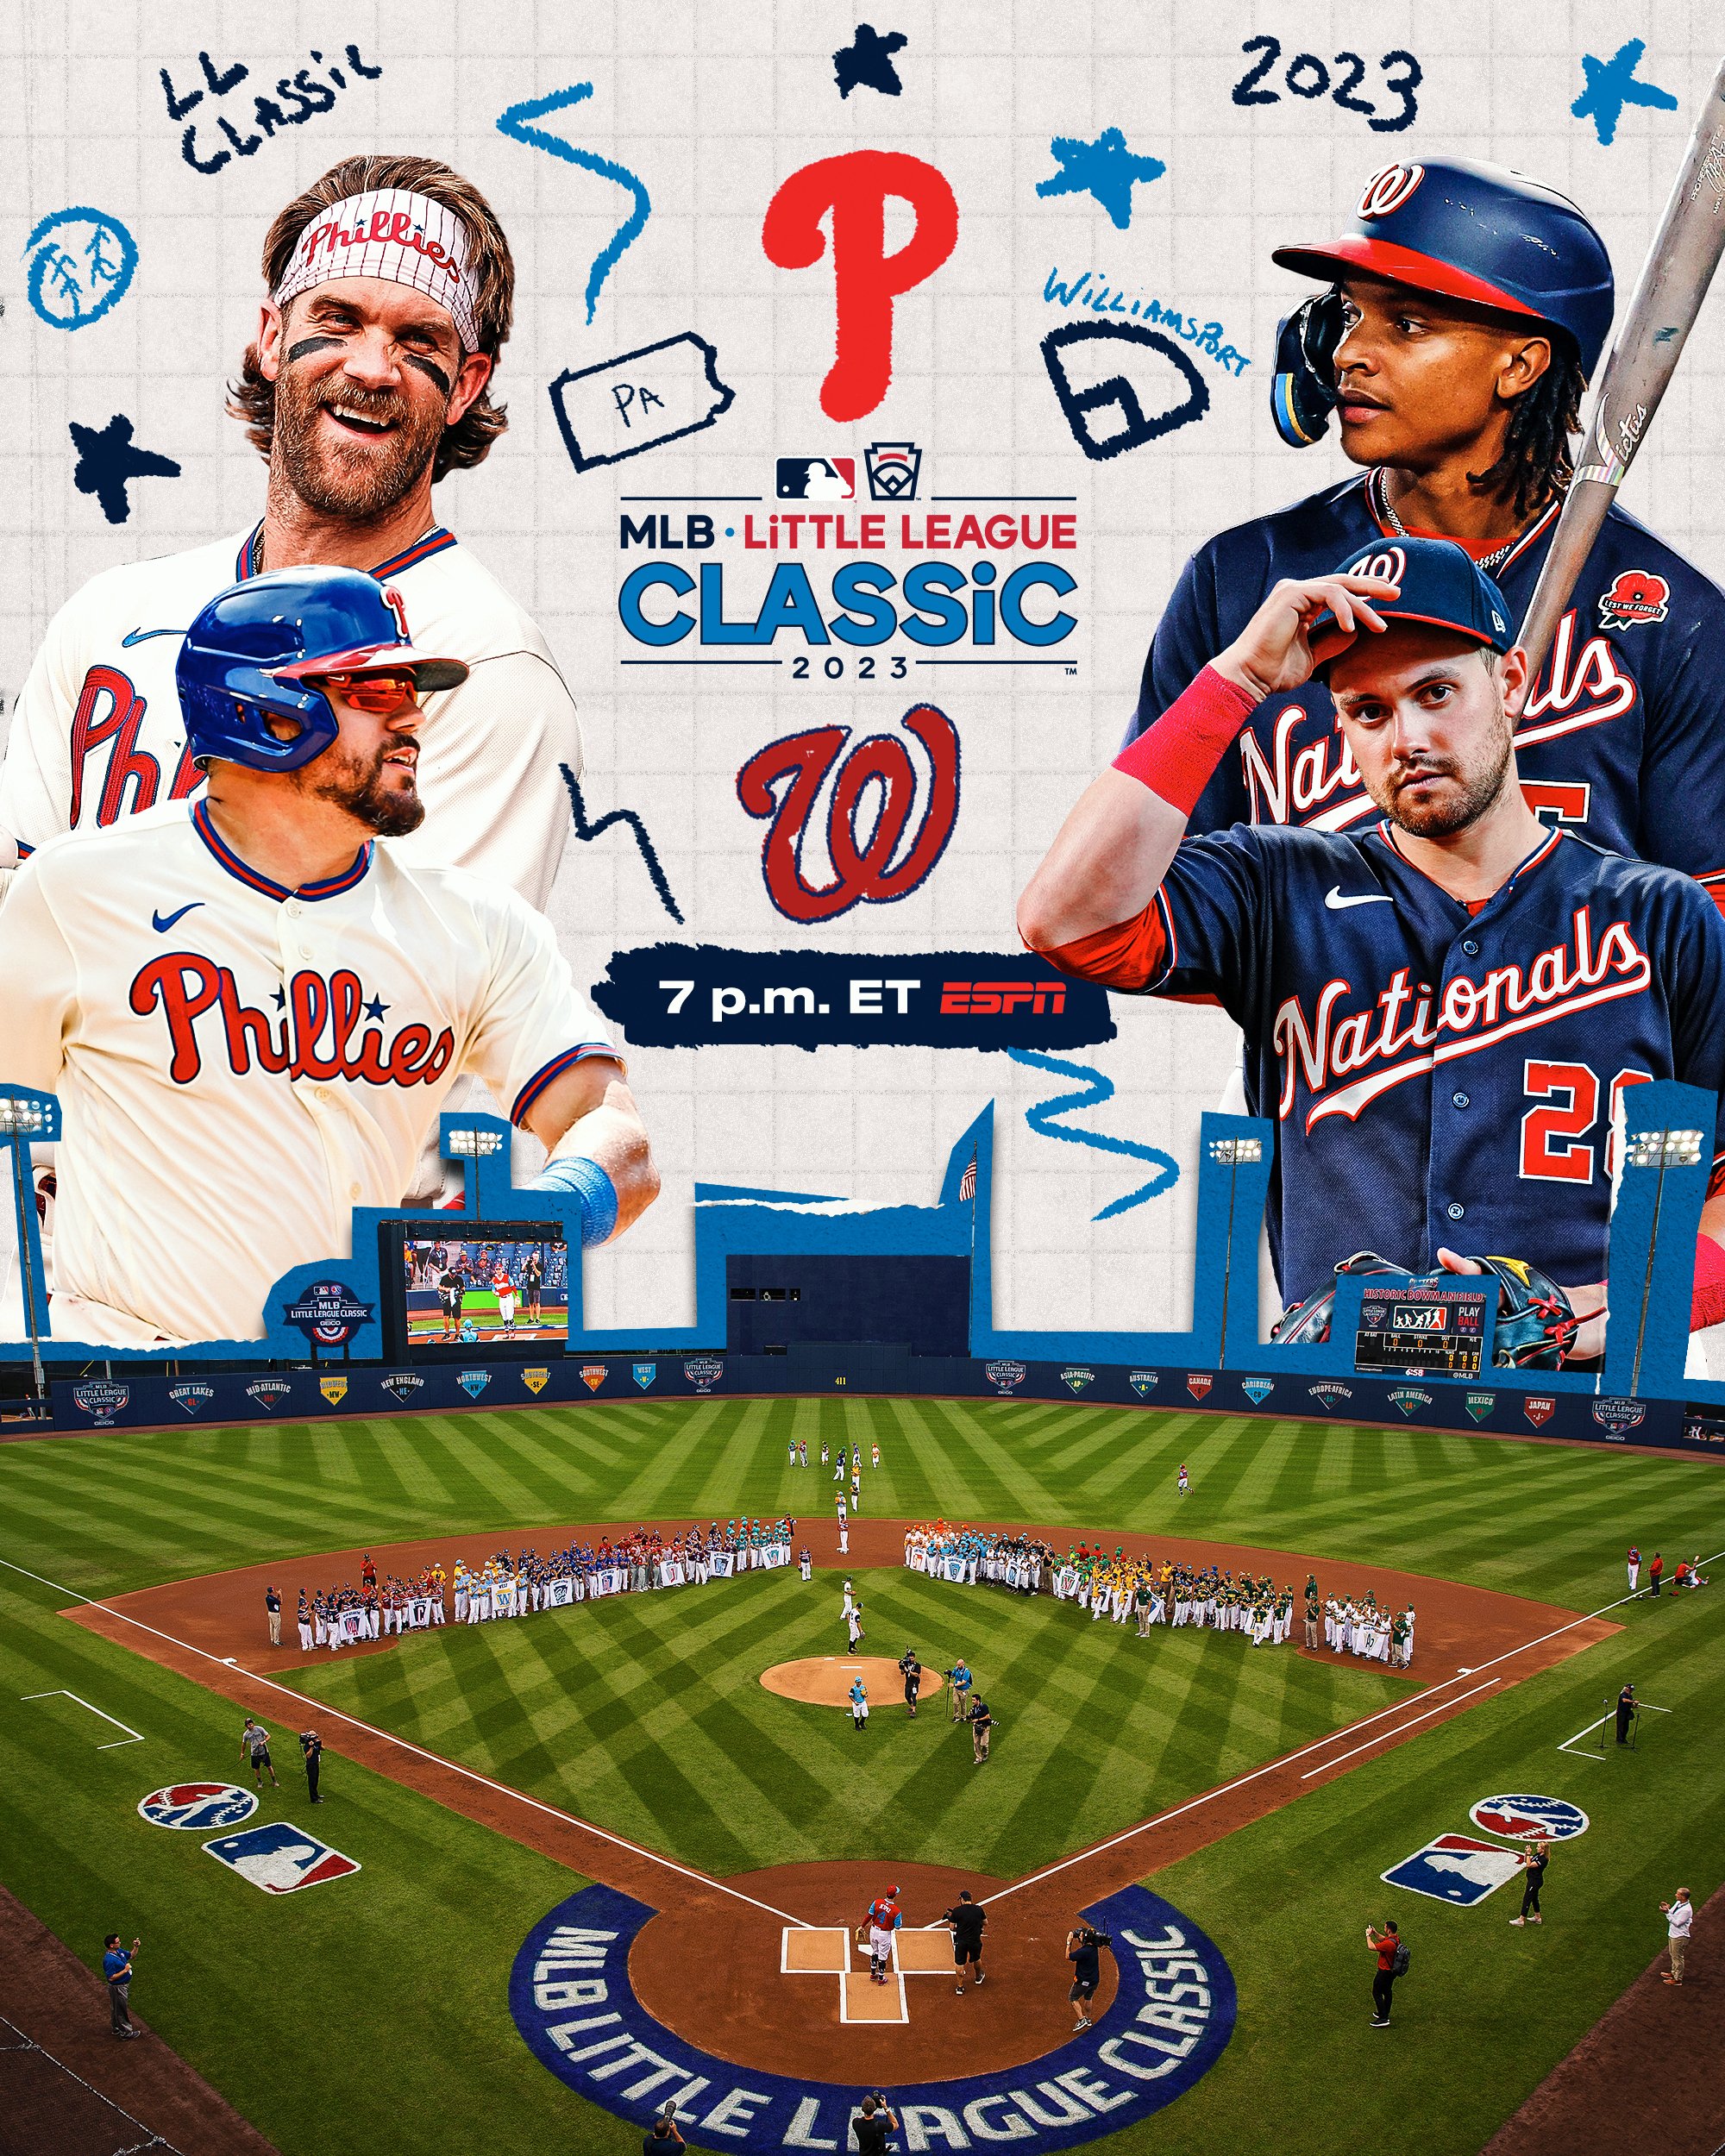 MLB on X: The fun is almost here! Watch @Phillies vs. @Nationals at 7 p.m.  ET on @ESPN in The #LittleLeagueClassic from Williamsport.   / X